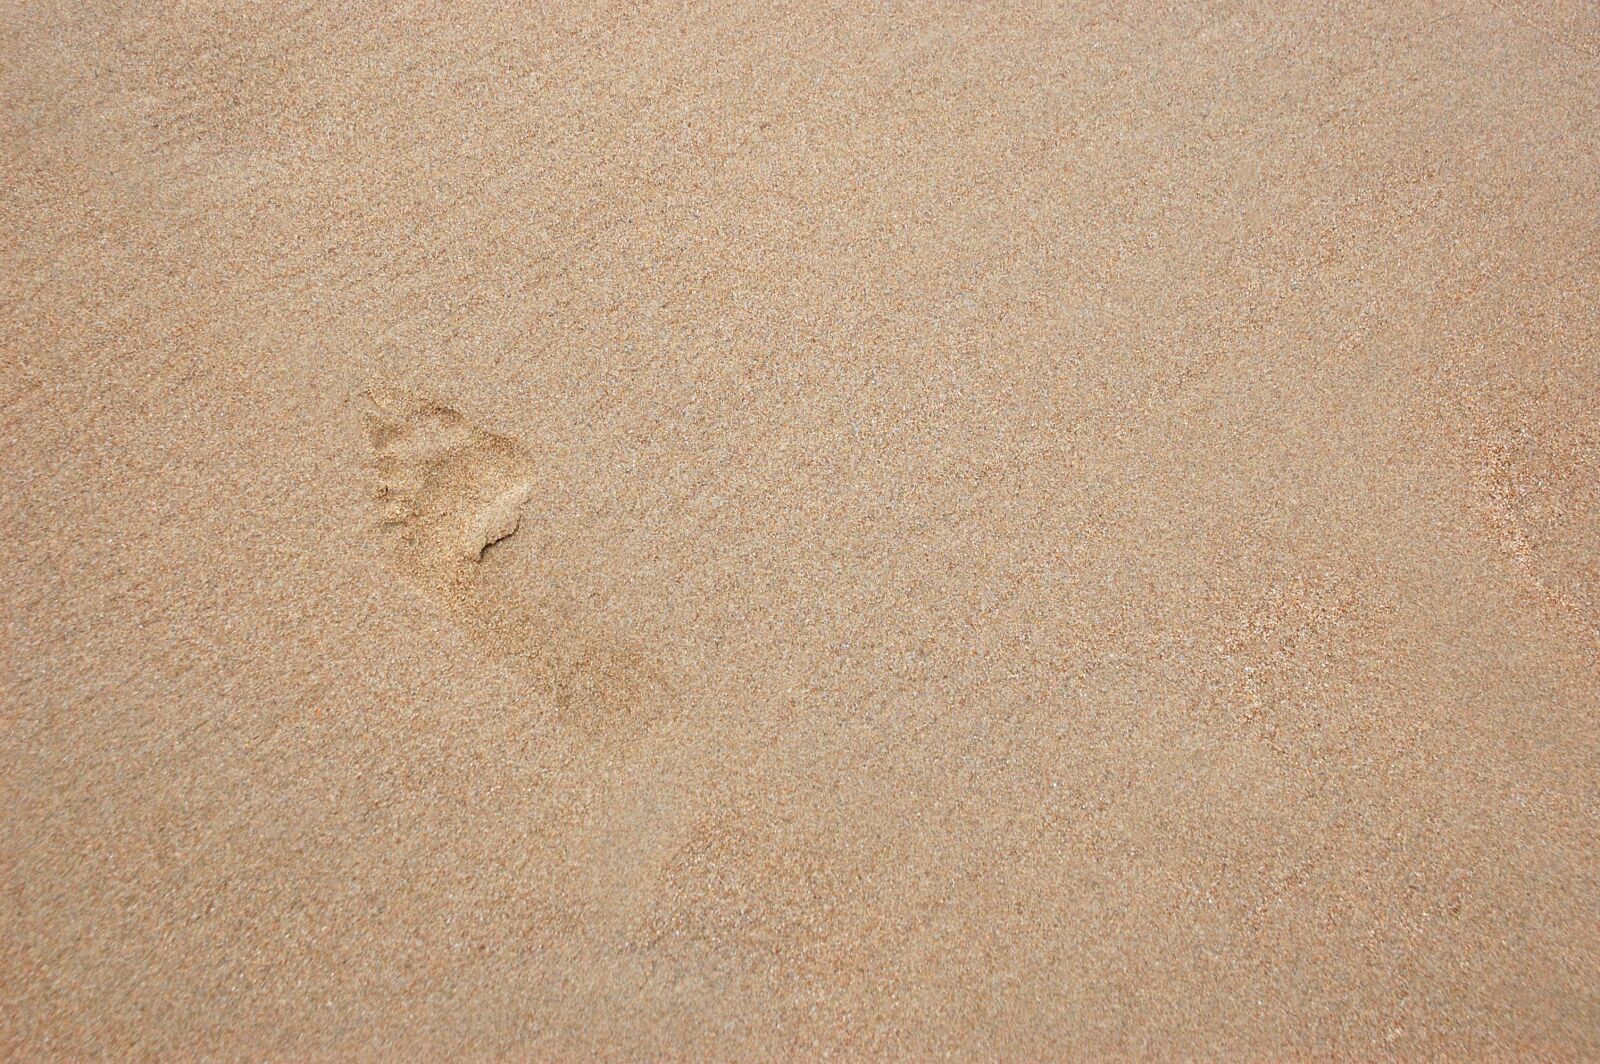 Nikon D40 + Tamron AF 18-270mm F3.5-6.3 Di II VC LD Aspherical (IF) MACRO sample photo. Footprint in the sand photography